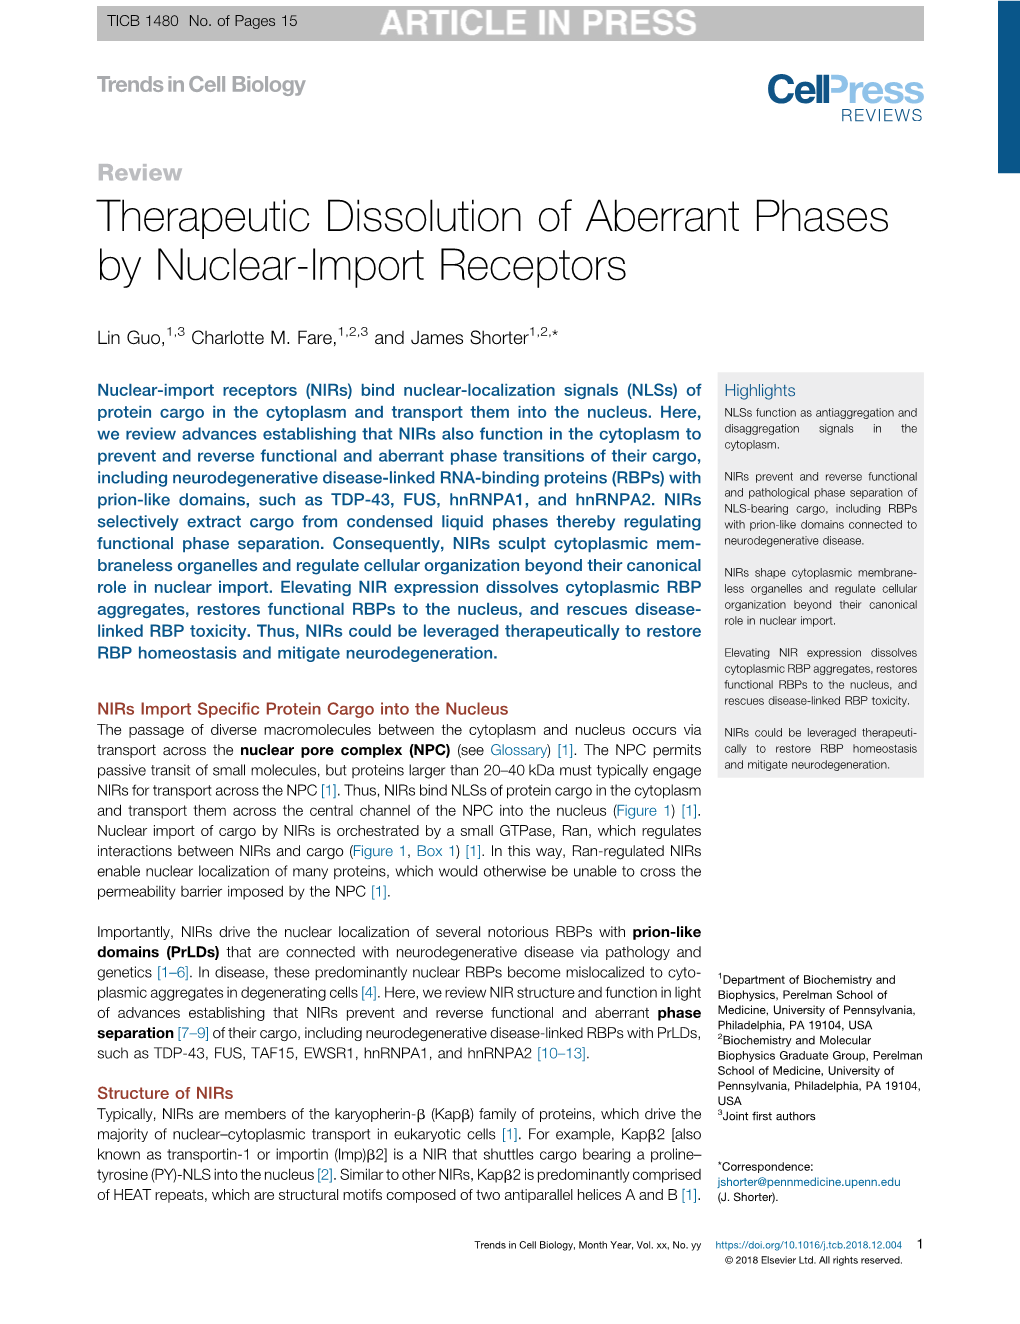 Therapeutic Dissolution of Aberrant Phases by Nuclear-Import Receptors